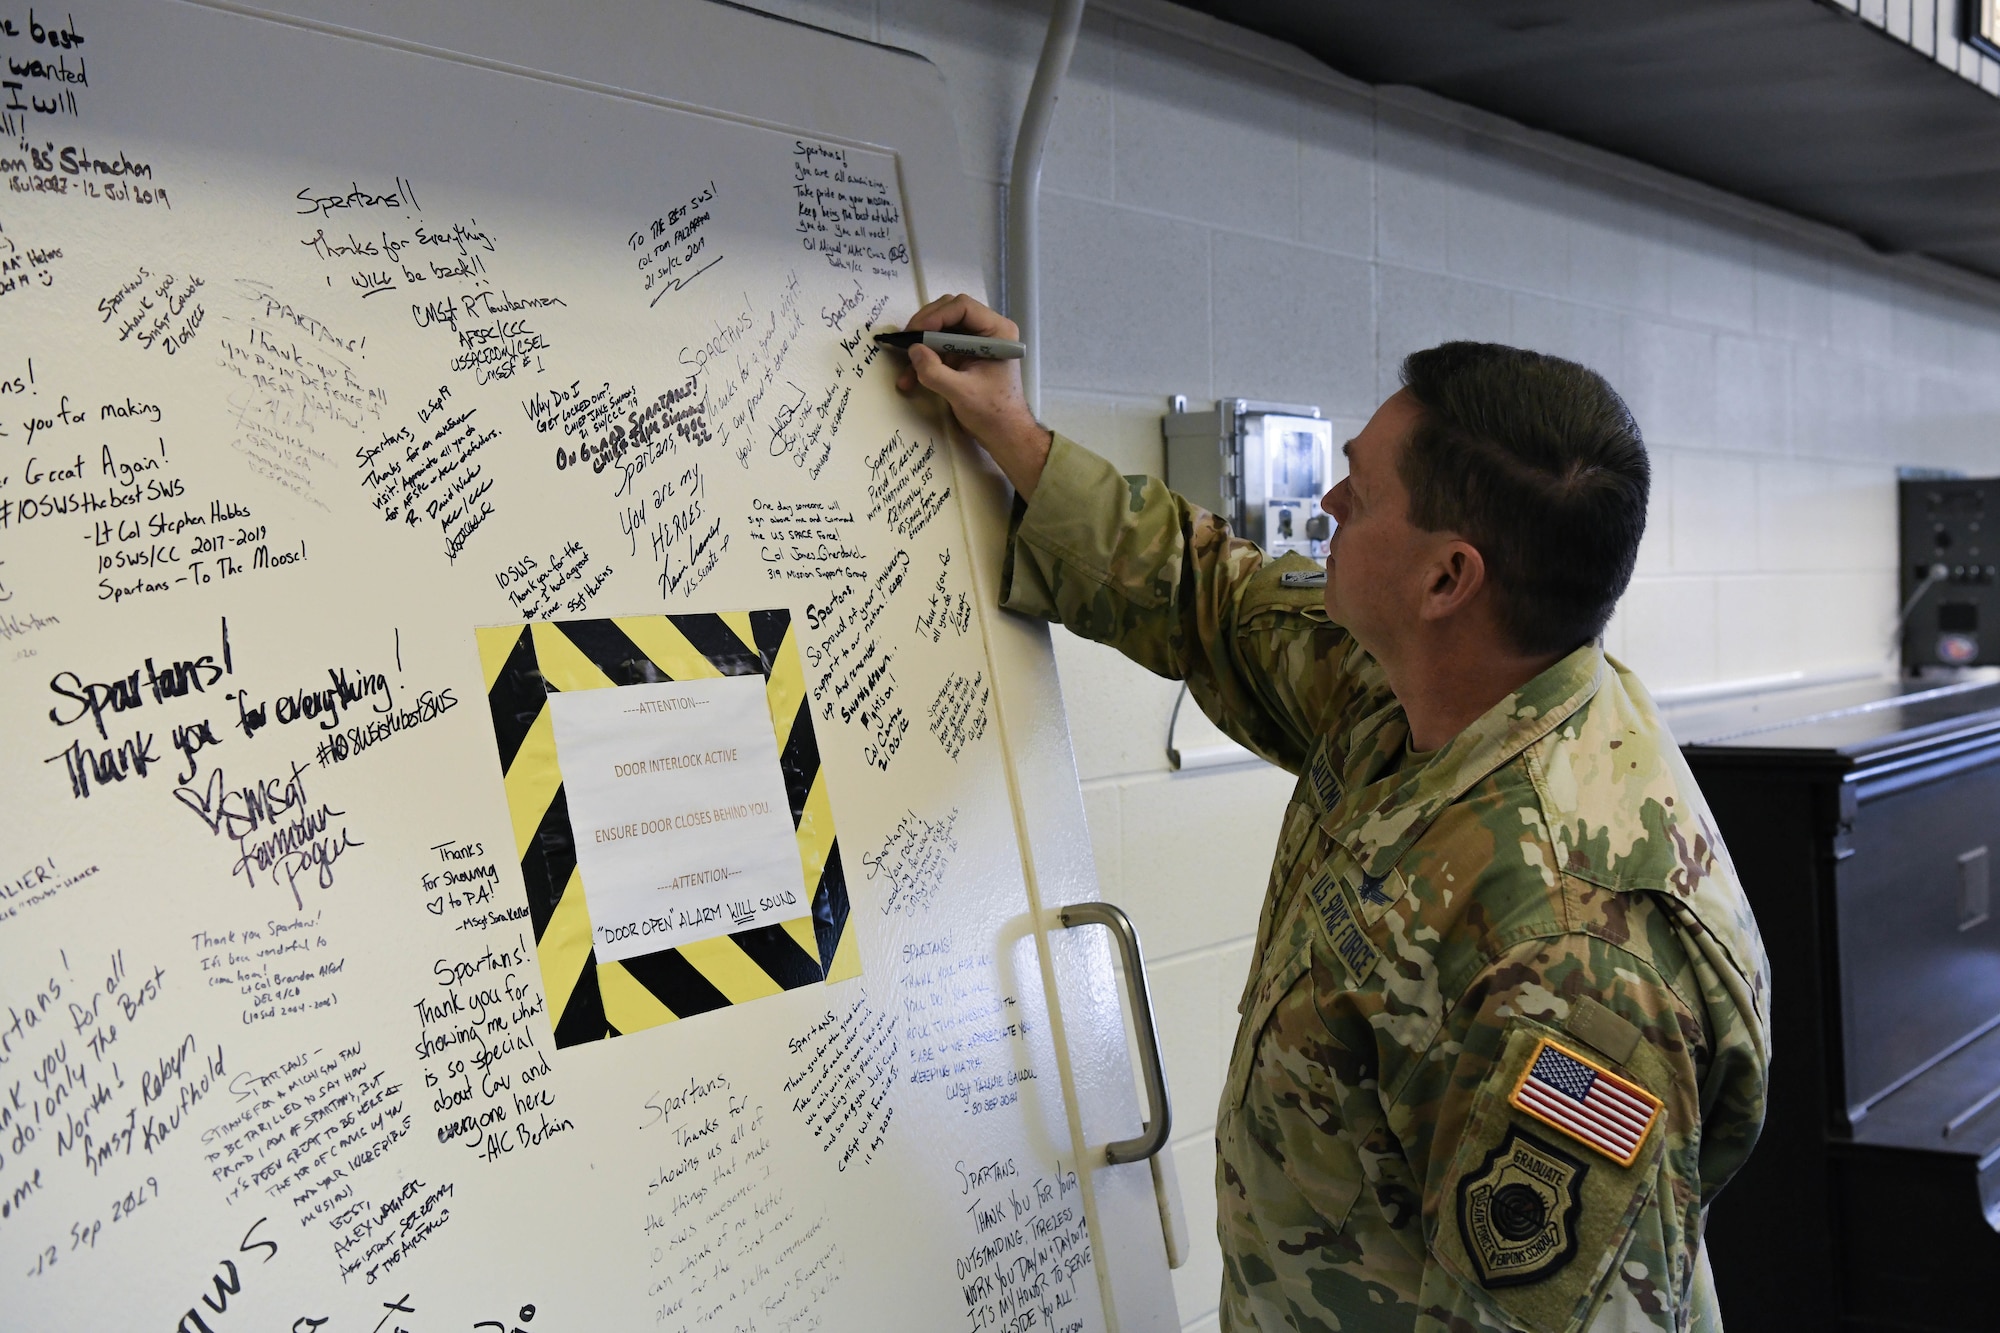 Military member signs a large door.